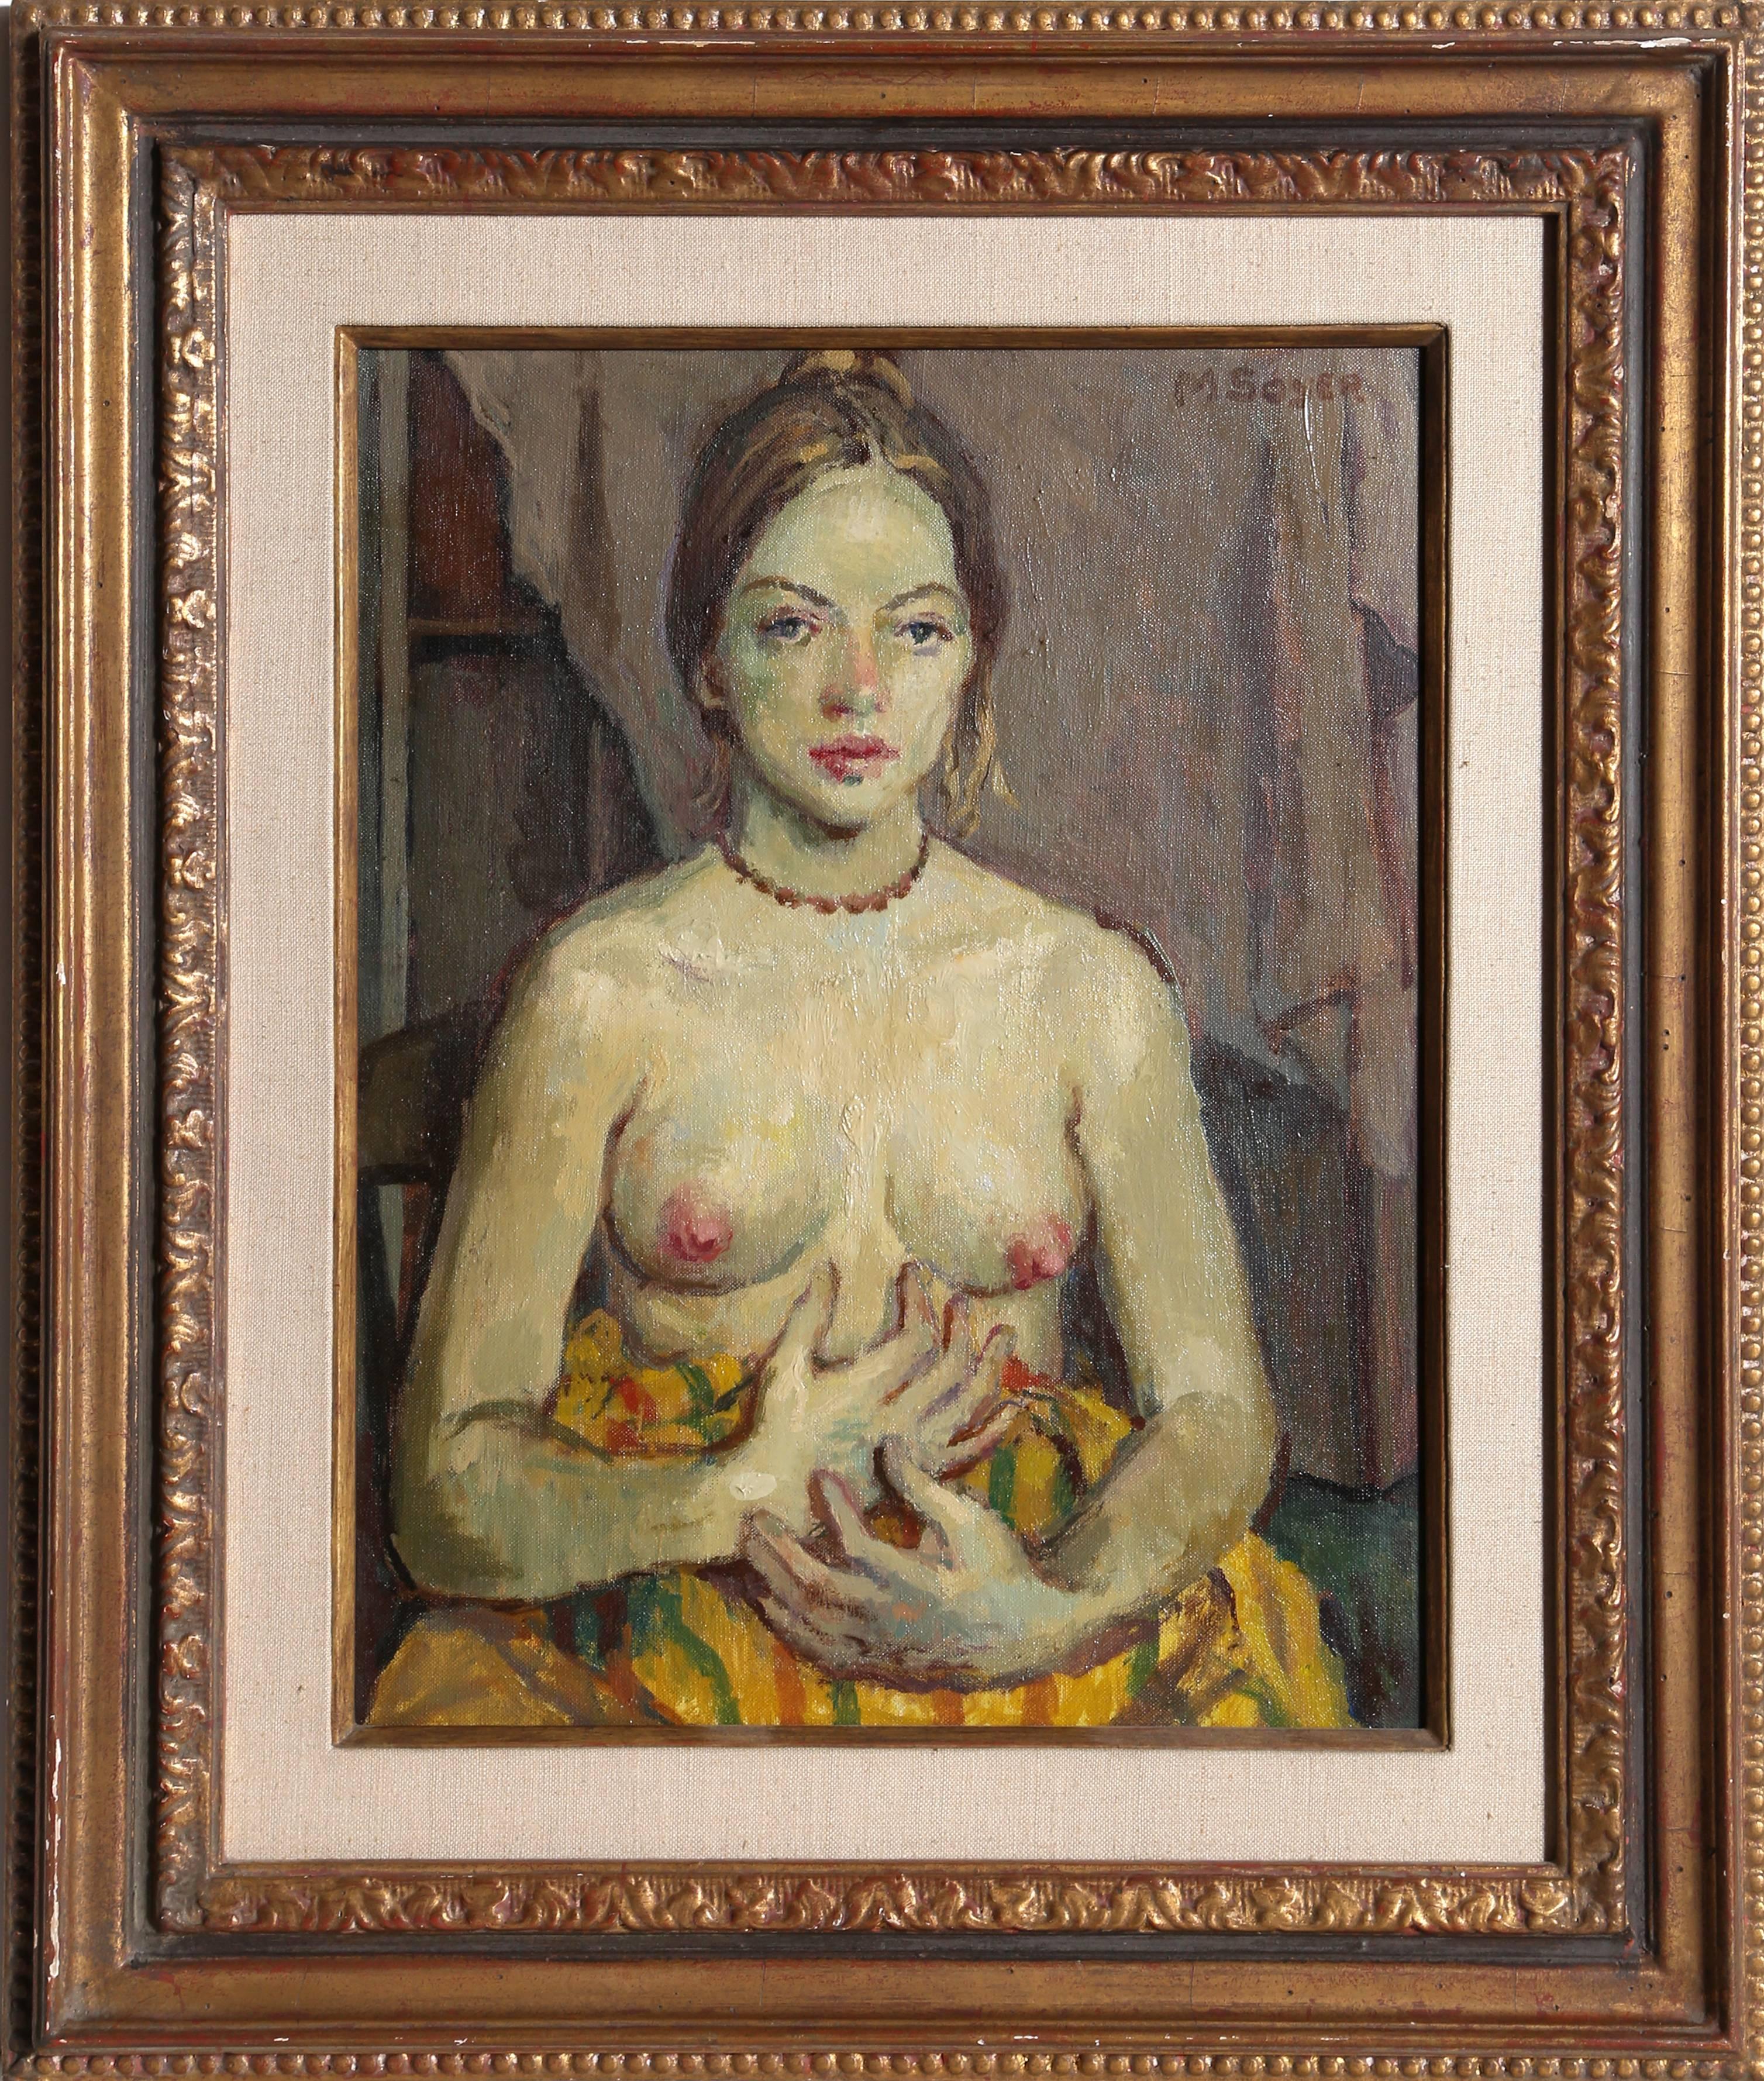 Moses Soyer Nude Painting – Sitzender Akt Posing